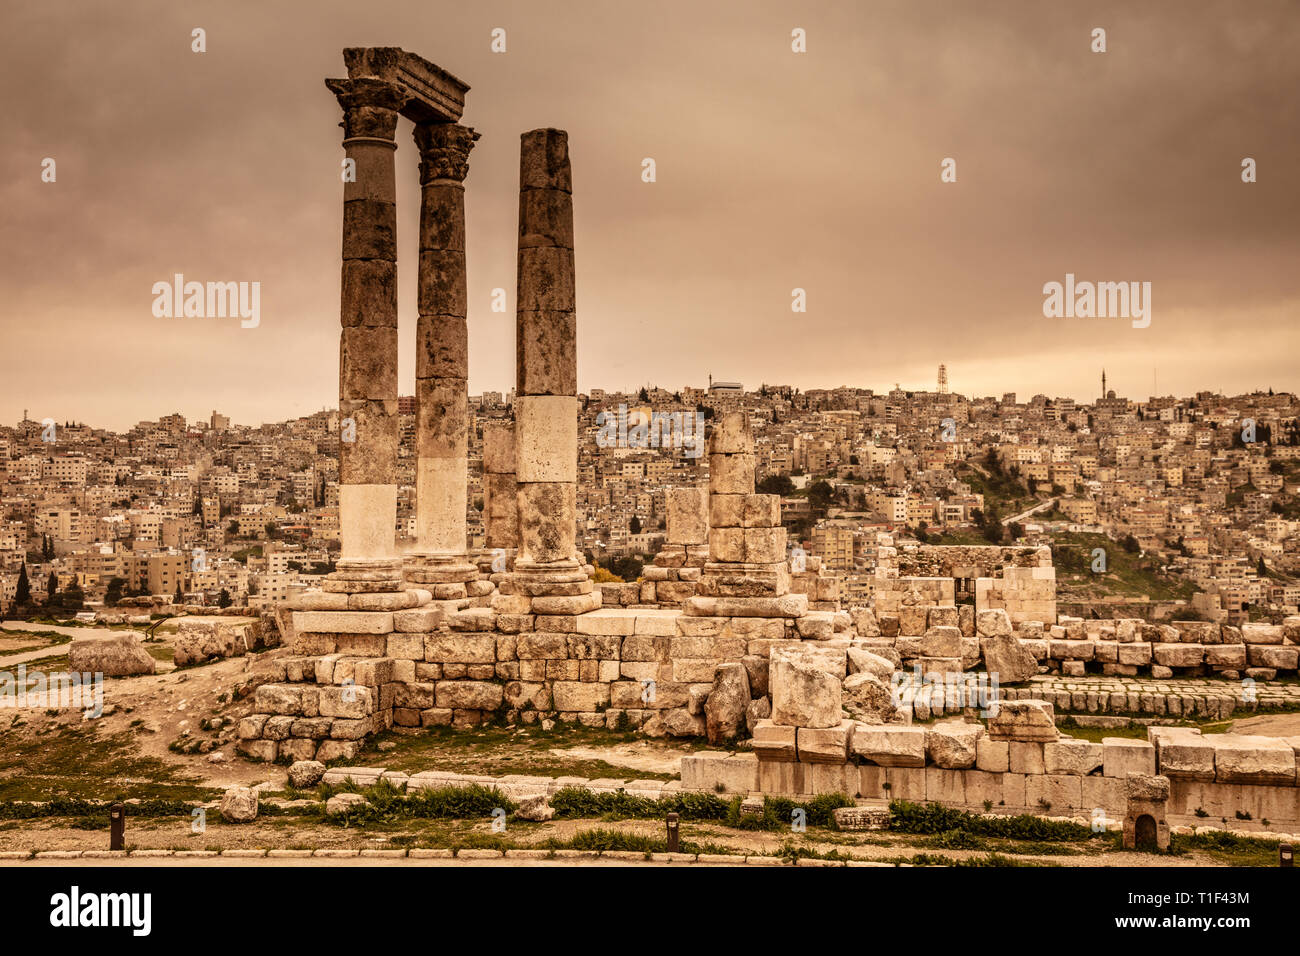 Detail of the columns located in the citadel of Amman located atop Jabal Al Qal'a, with the background of the old city. Jordan. Stock Photo